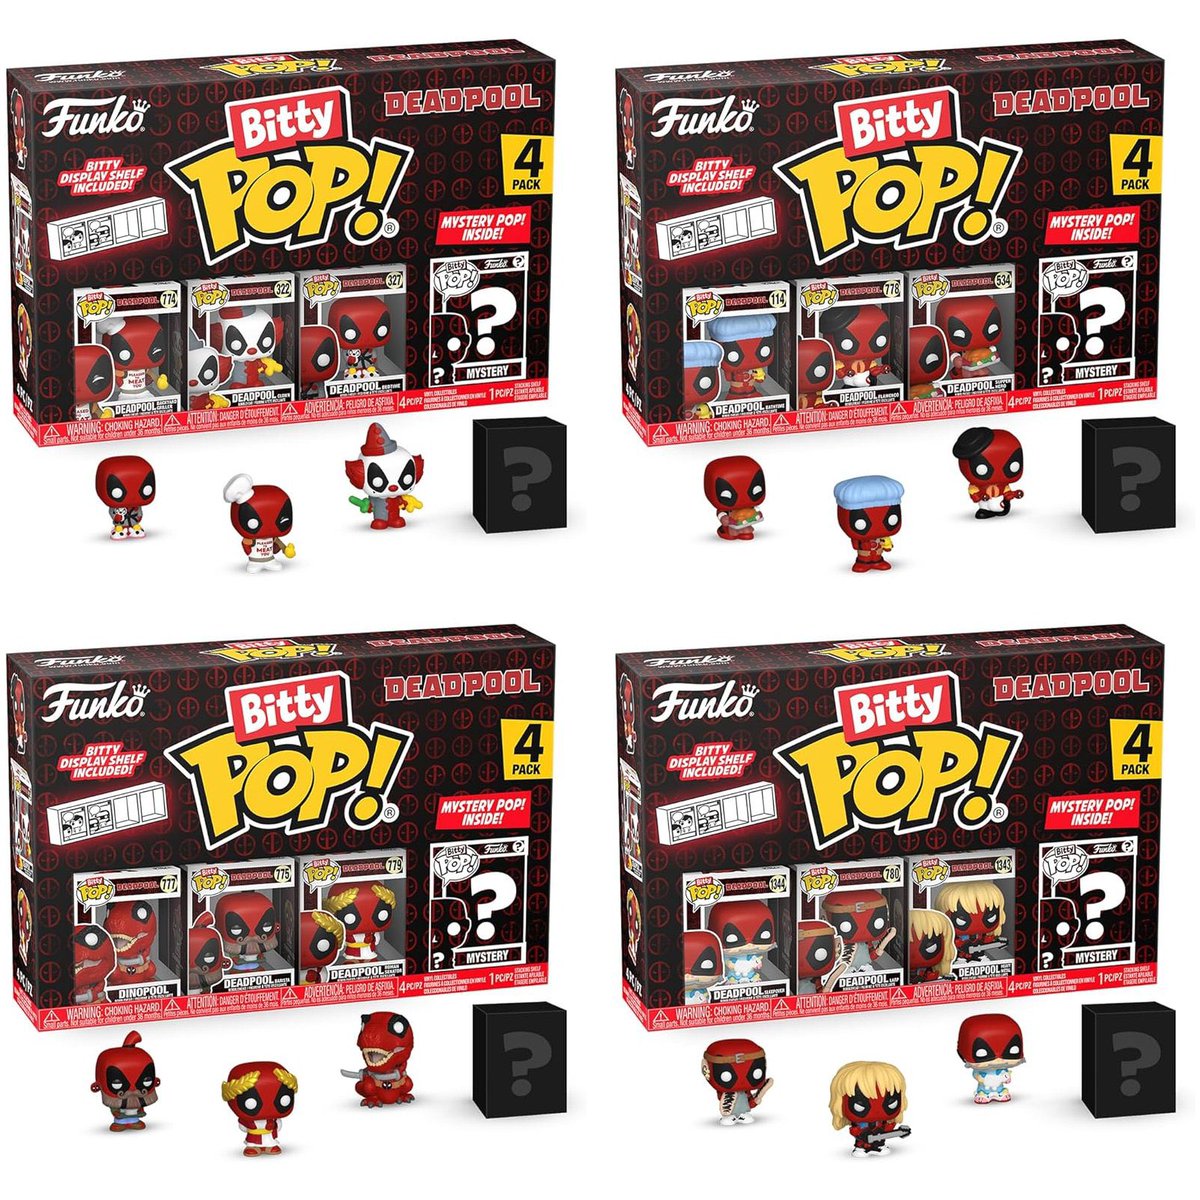 Preorder Now: Funko Bitty Pop!: Deadpool 📦 Amazon: amzn.to/3wpc3QU 🌎 Ent Earth: ee.toys/55UHQX * No Charge Until it Ships #Ad #Deadpool #Funko #FunkoPop #FunkoPops #FunkoPopVinyl #Pop #PopVinyl #FunkoCollector #Collectible #Collectibles #Toy #Toys